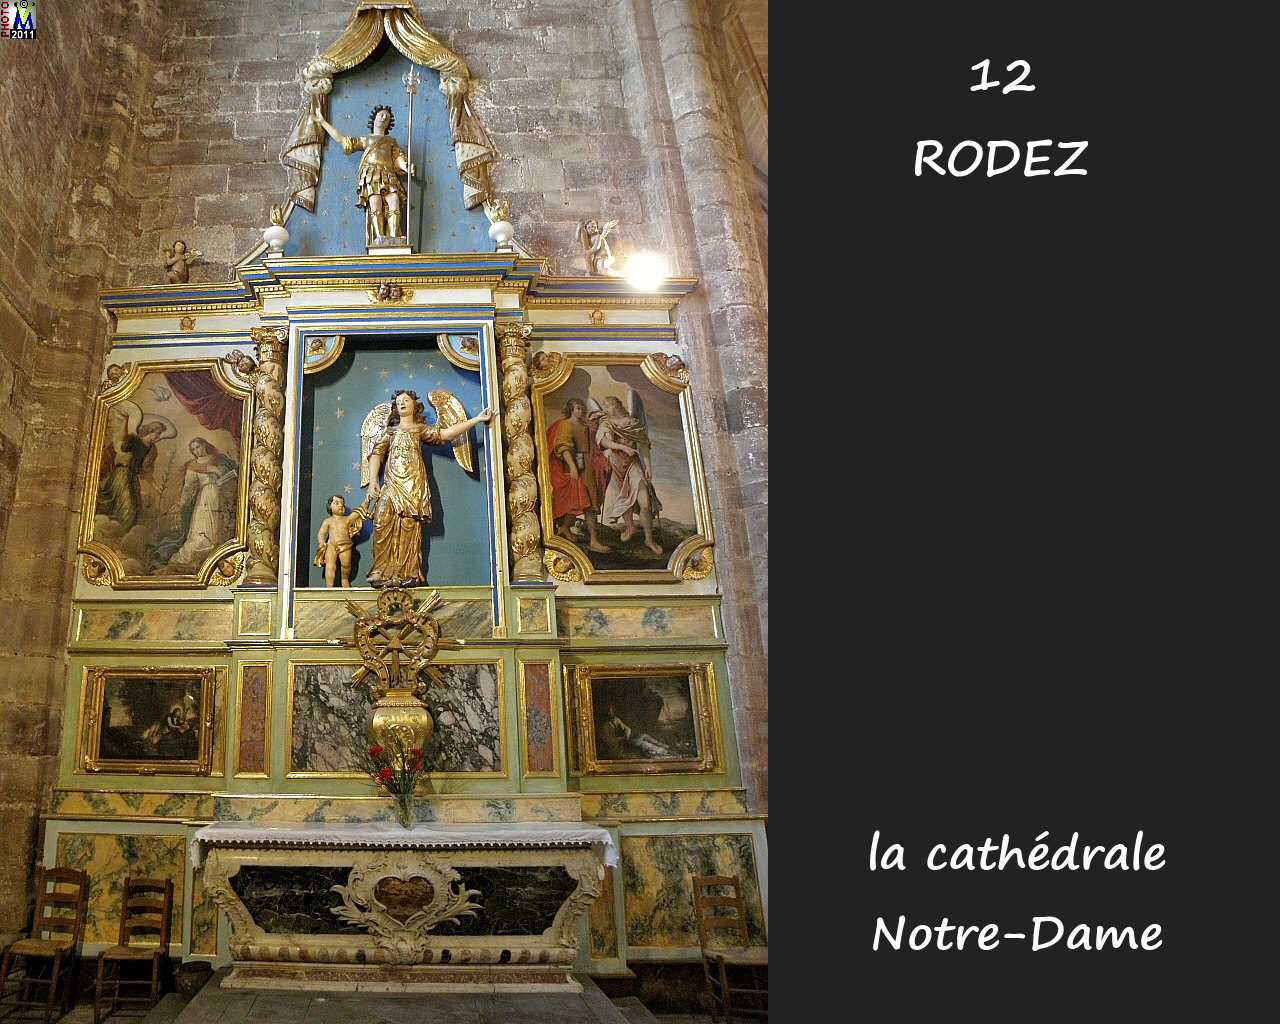 12RODEZ_cathedrale_262.jpg